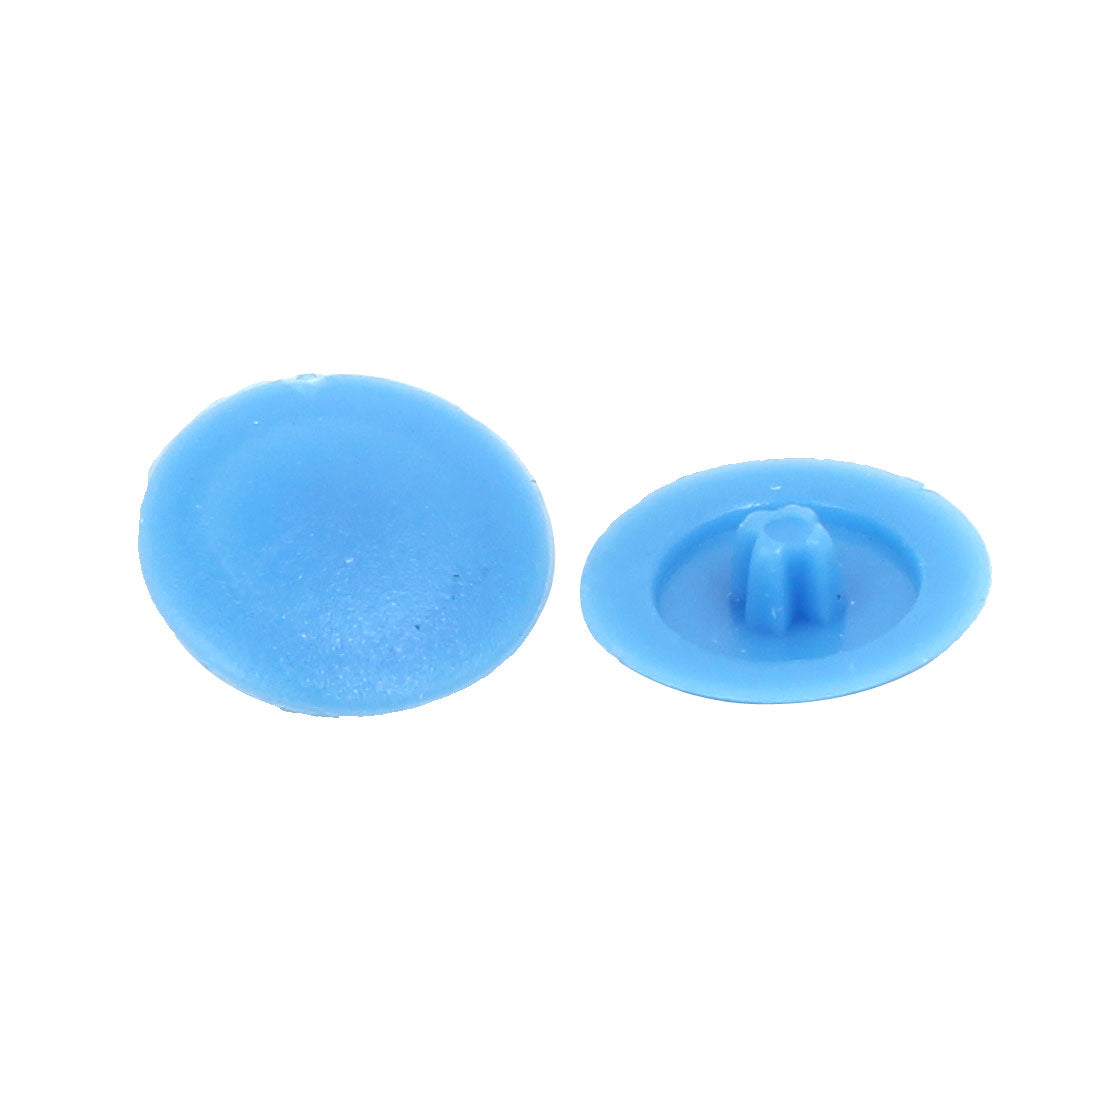 uxcell Uxcell 12mm Dia Plastic Phillips Screw Cap Hole Plugs Dust Proof Covers Blue 50pcs